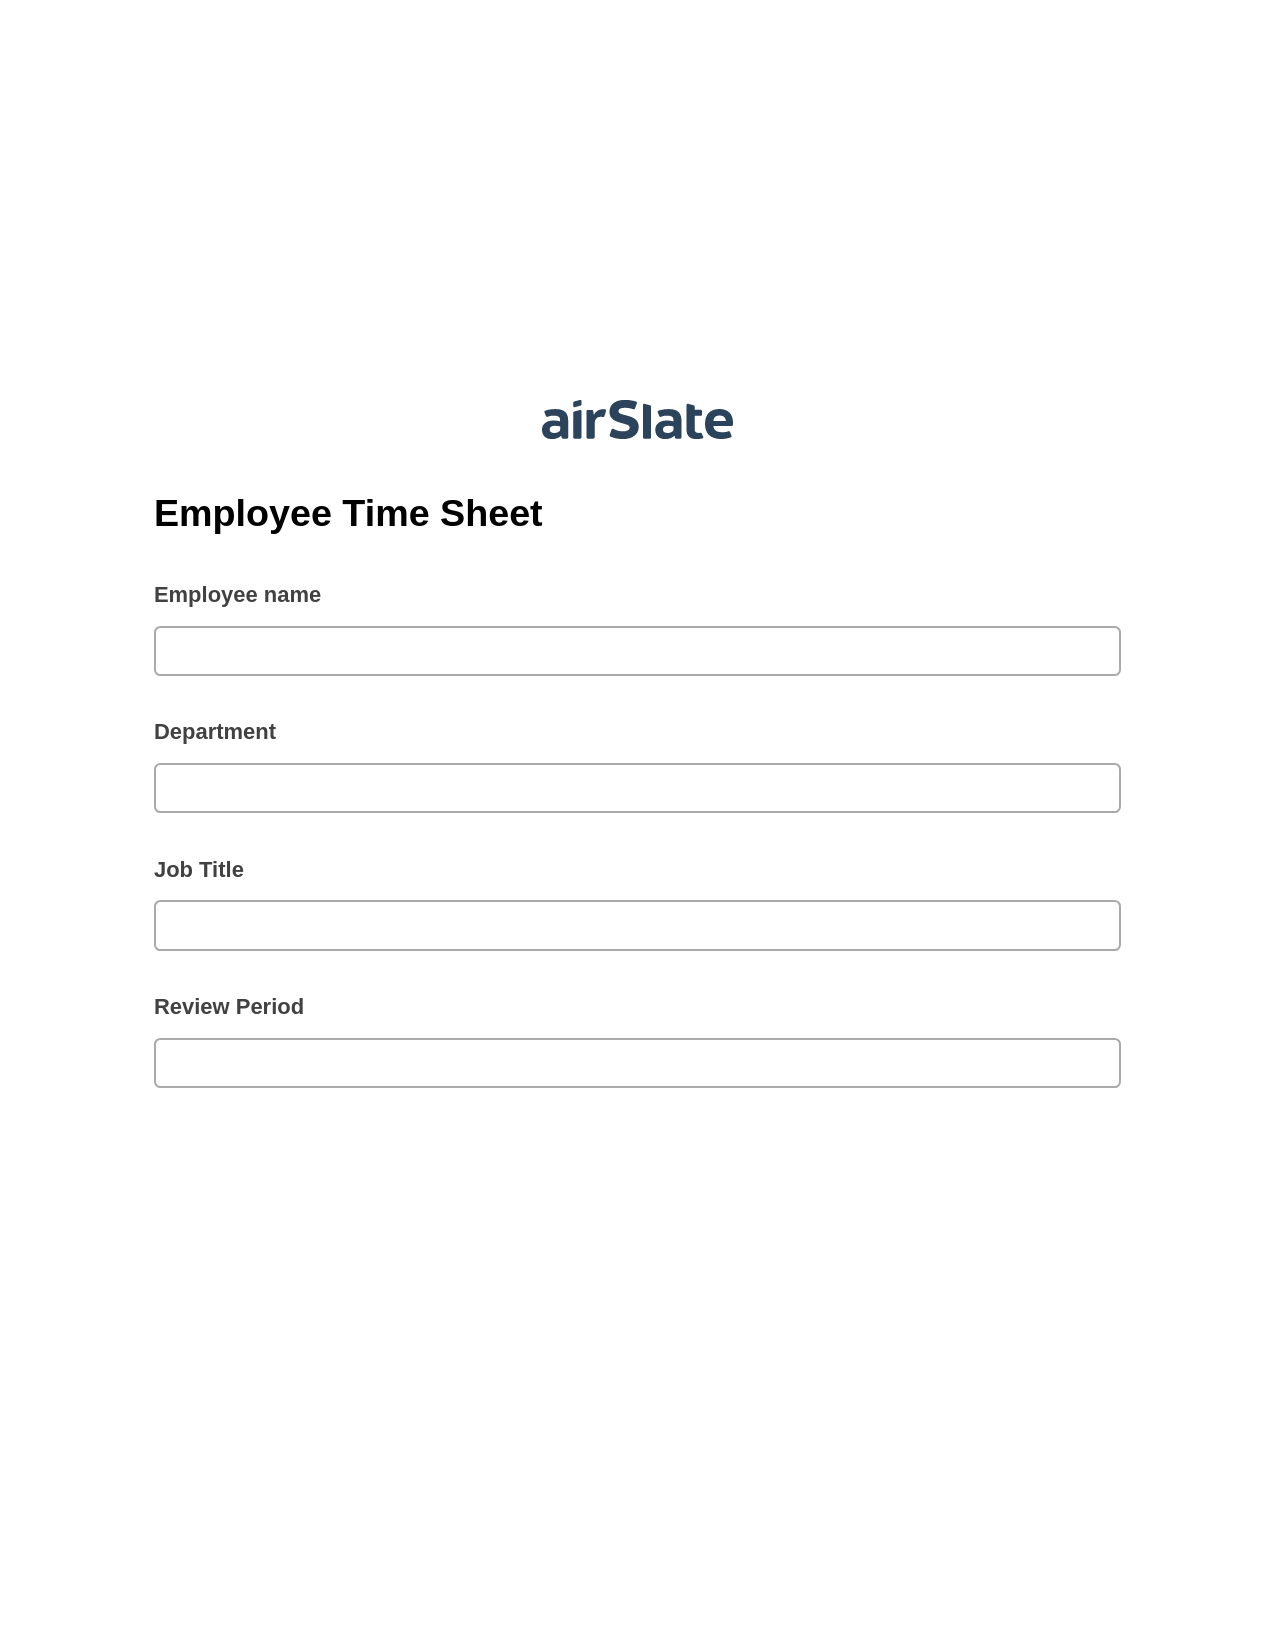 Multirole Employee Time Sheet Pre-fill from Salesforce Records Bot, Create Salesforce Records Bot, Archive to Google Drive Bot